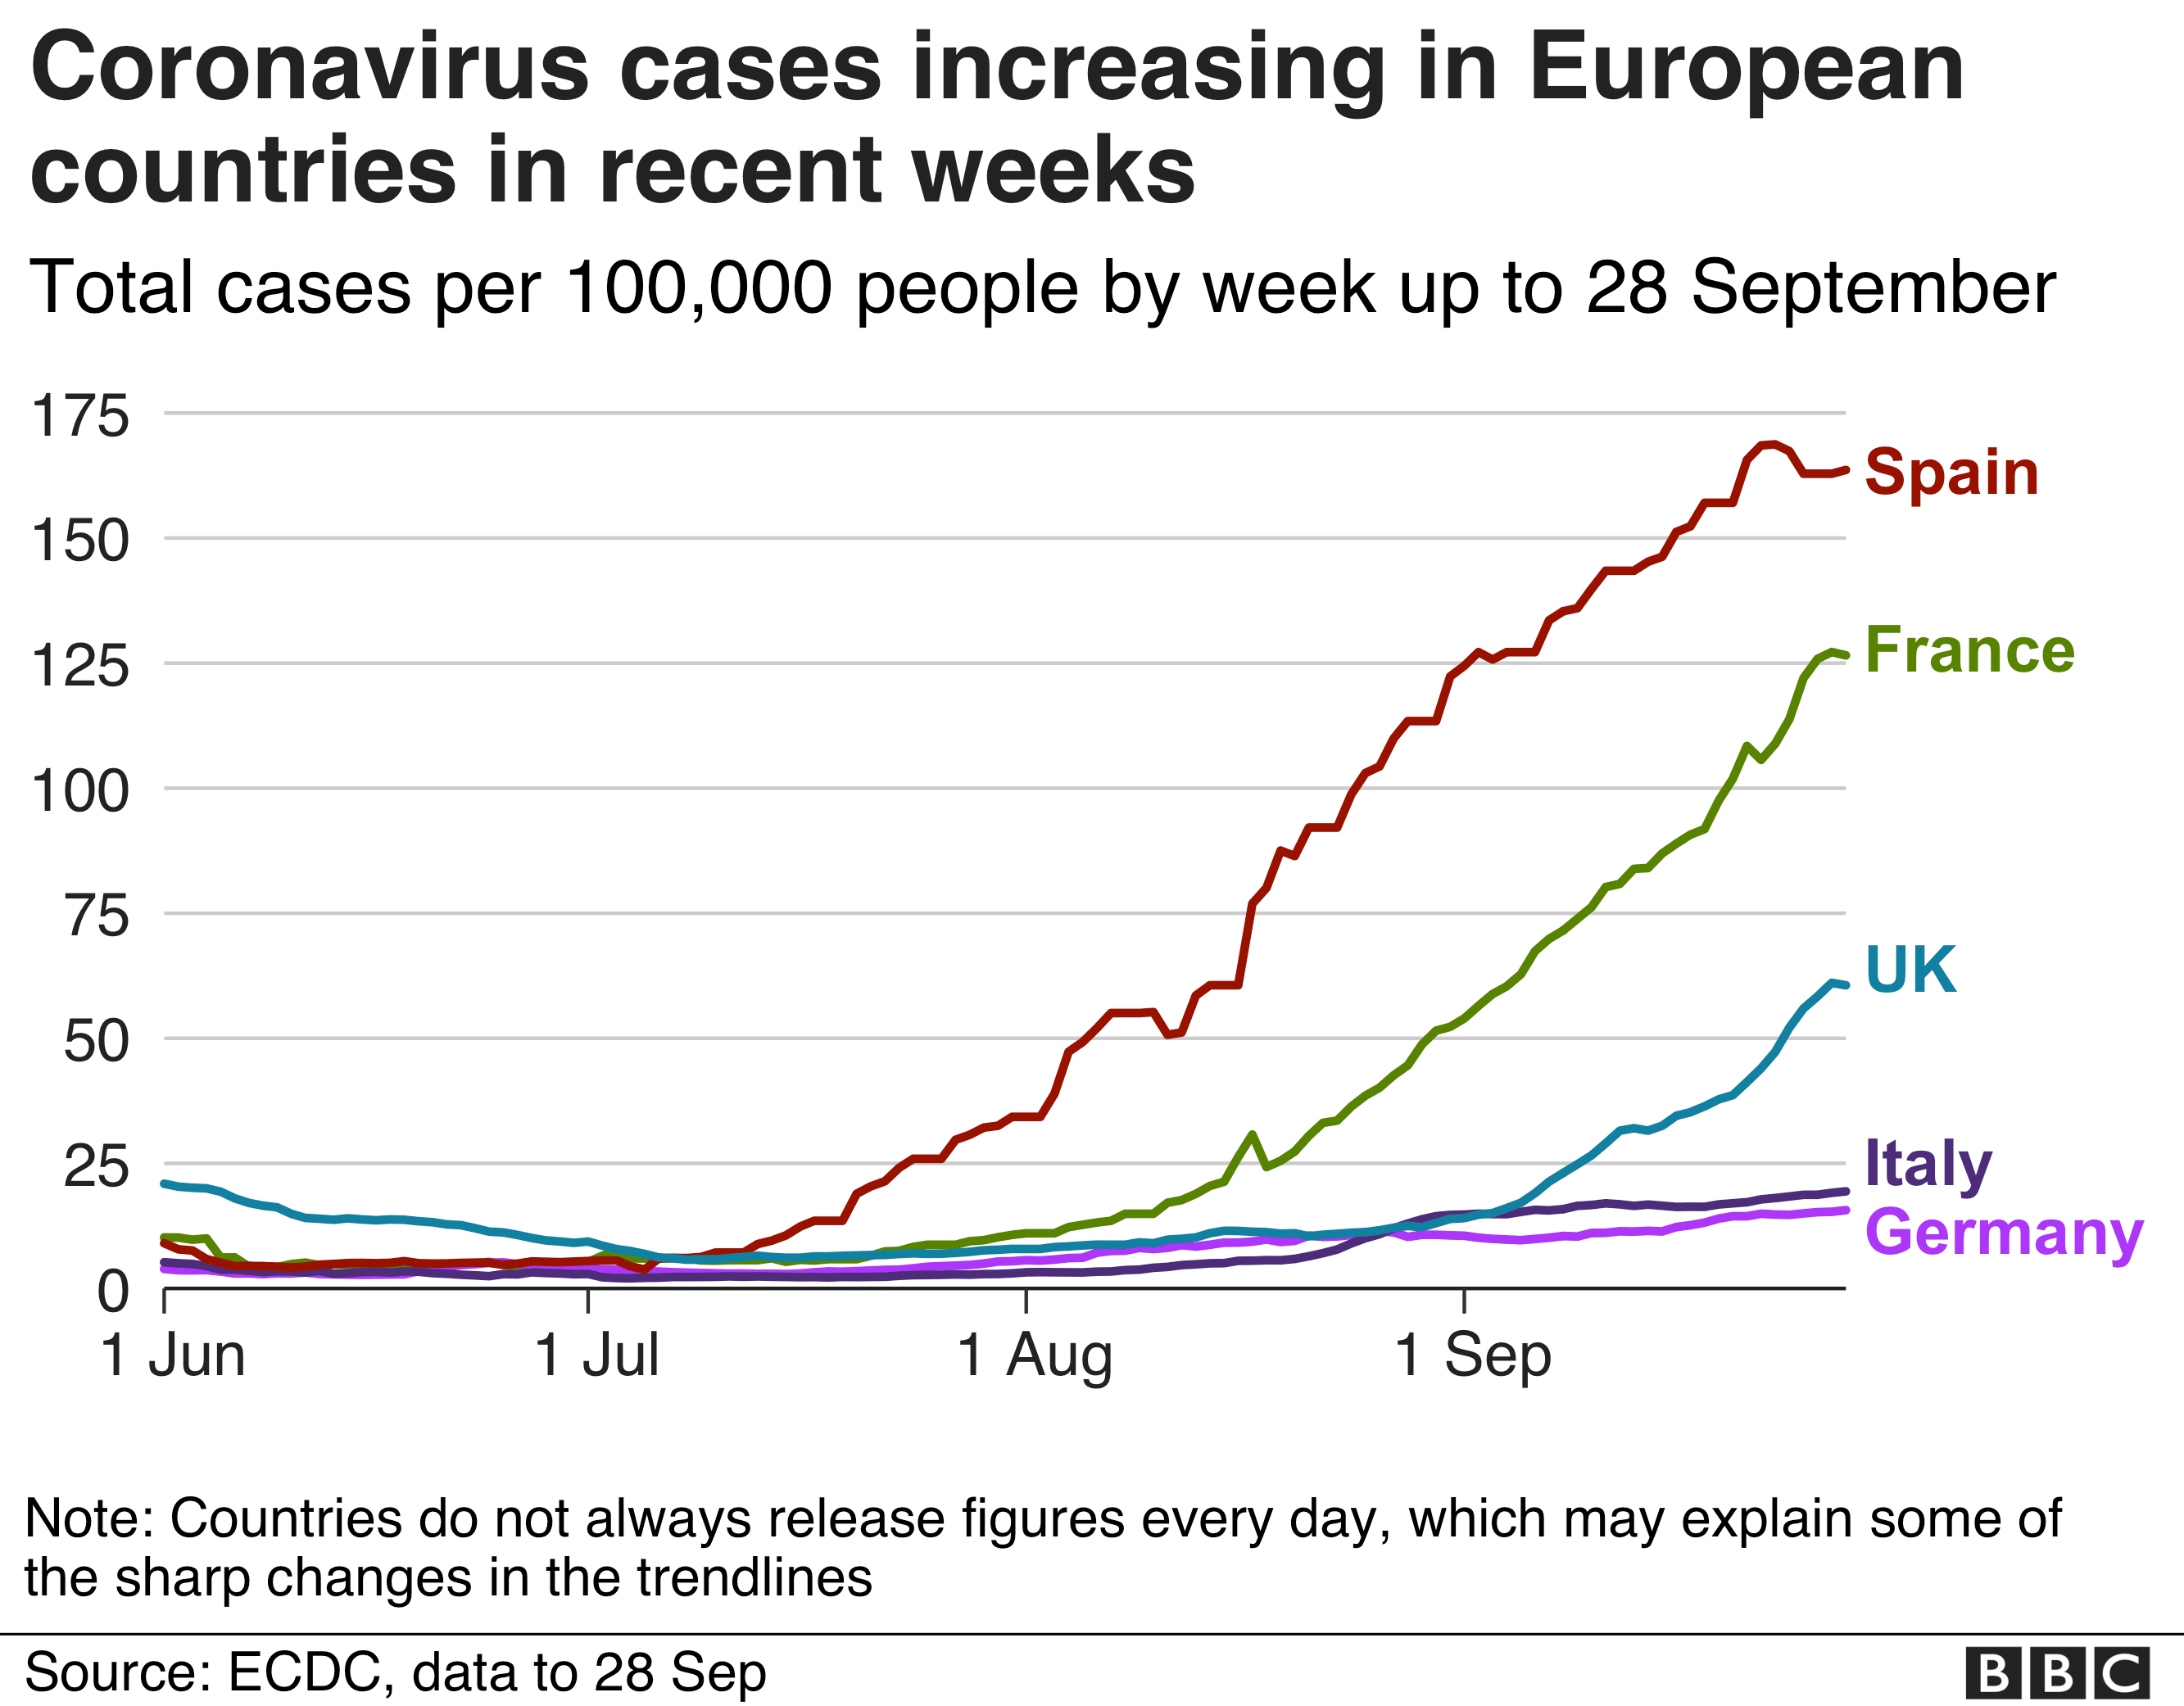 Line chart shows how cases increased fast in Spain, France, UK, and slower in Italy and Germany